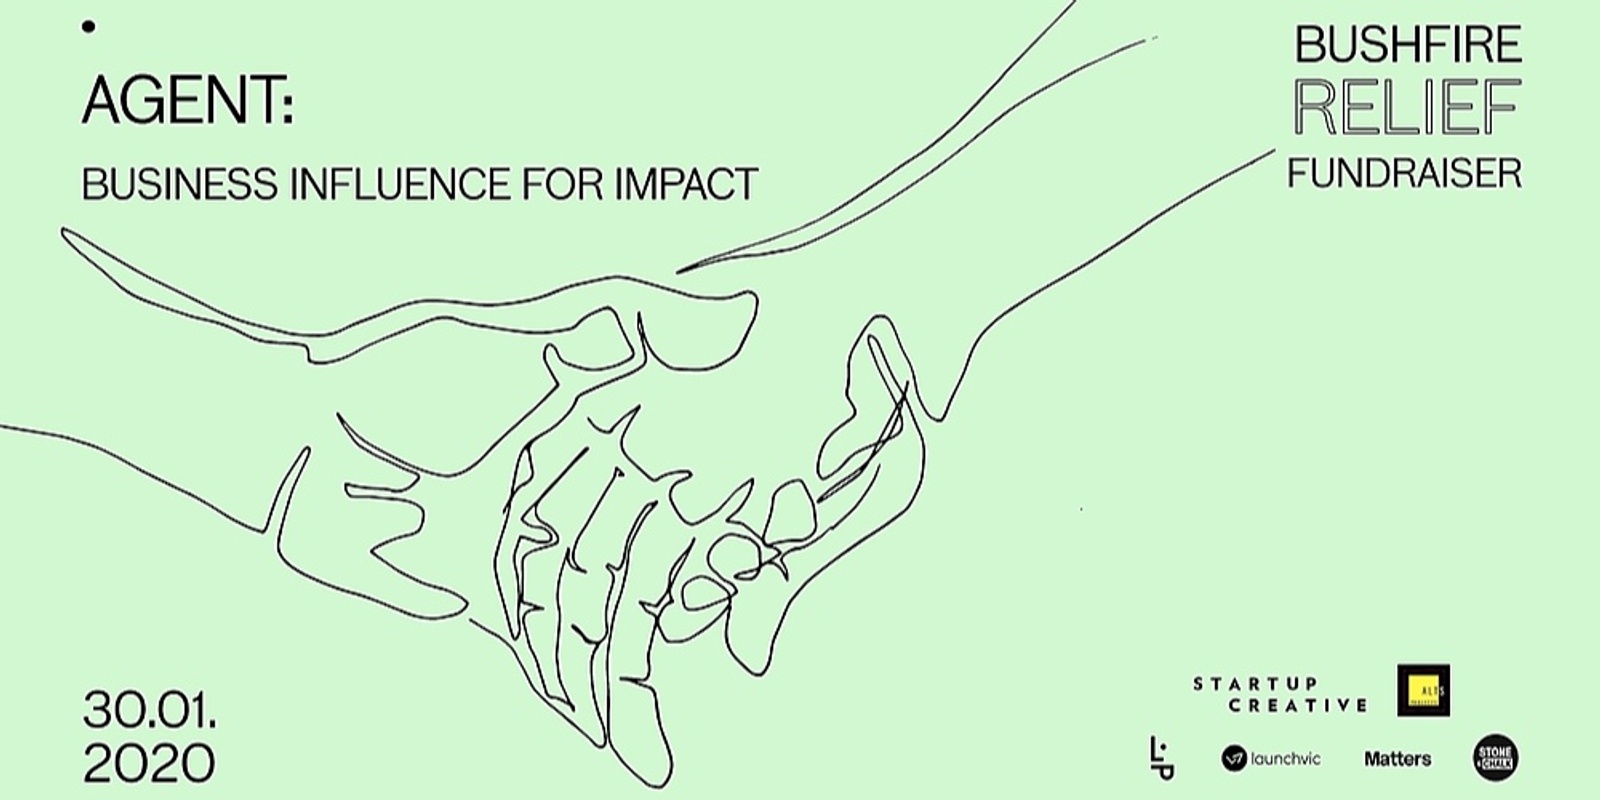 Banner image for AGENT: Business Influence for Impact (A bushfire relief fundraiser)